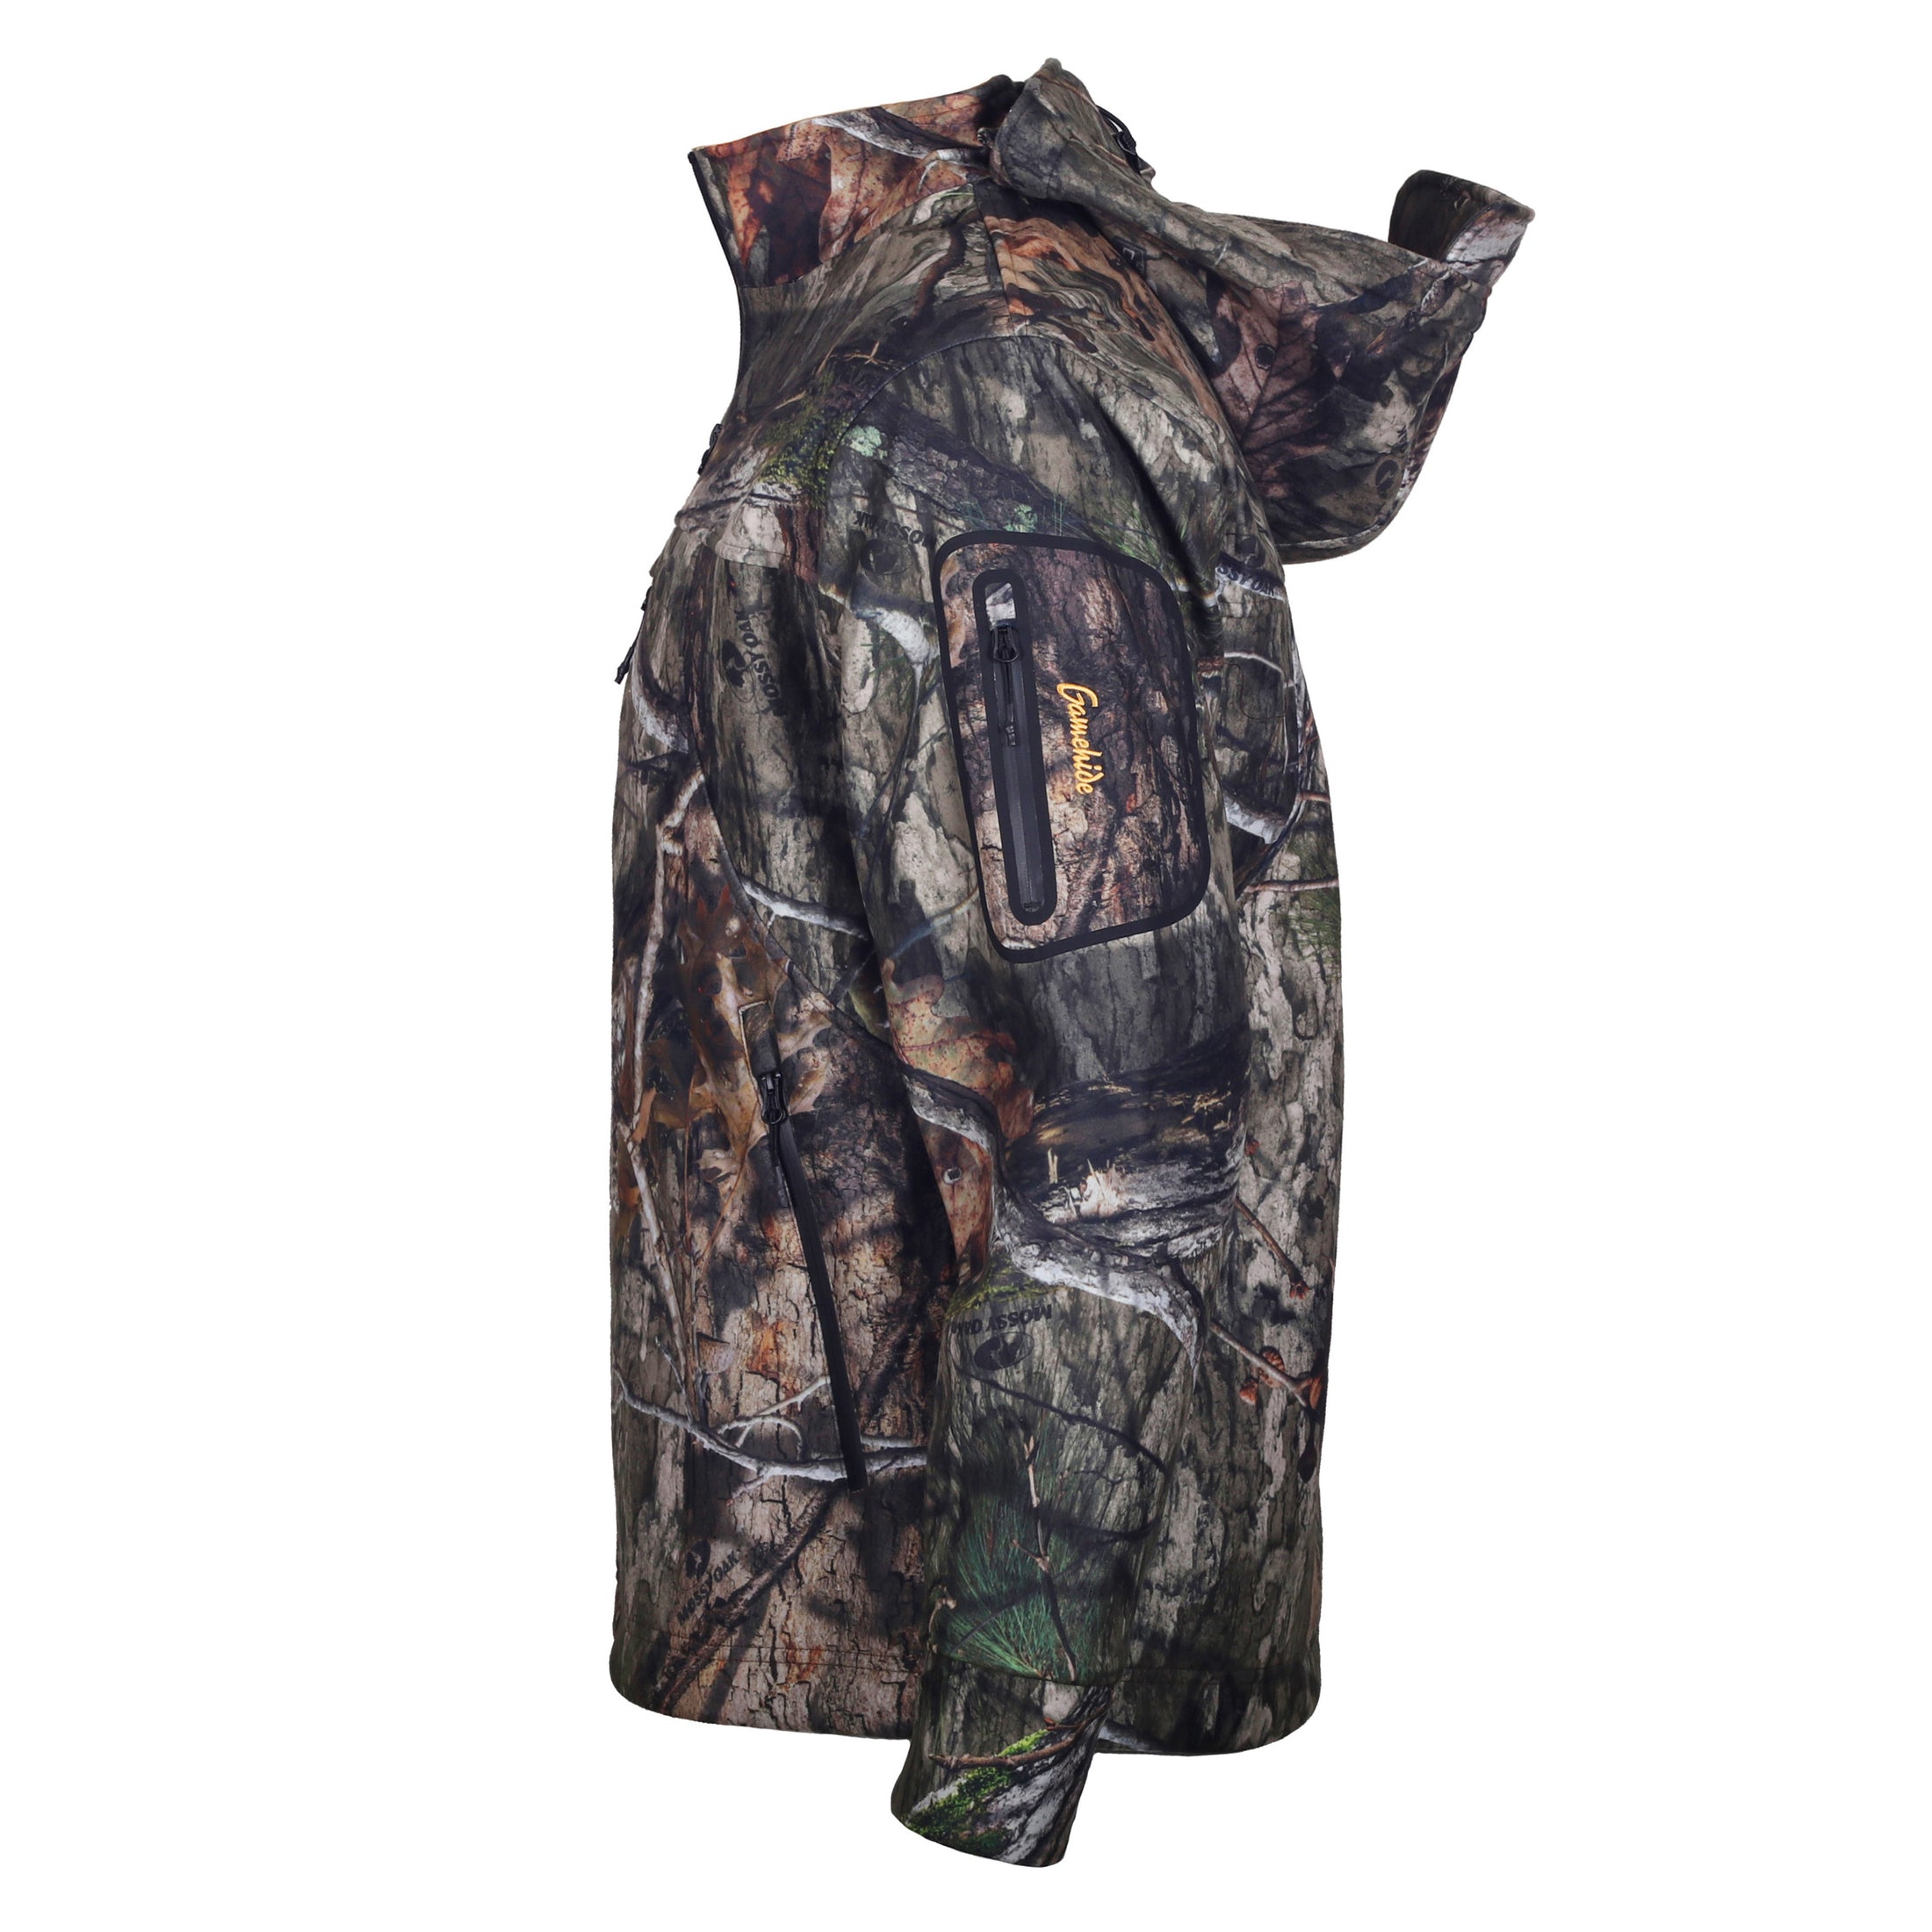 gamehide whitetail jacket side view (mossy oak dna)